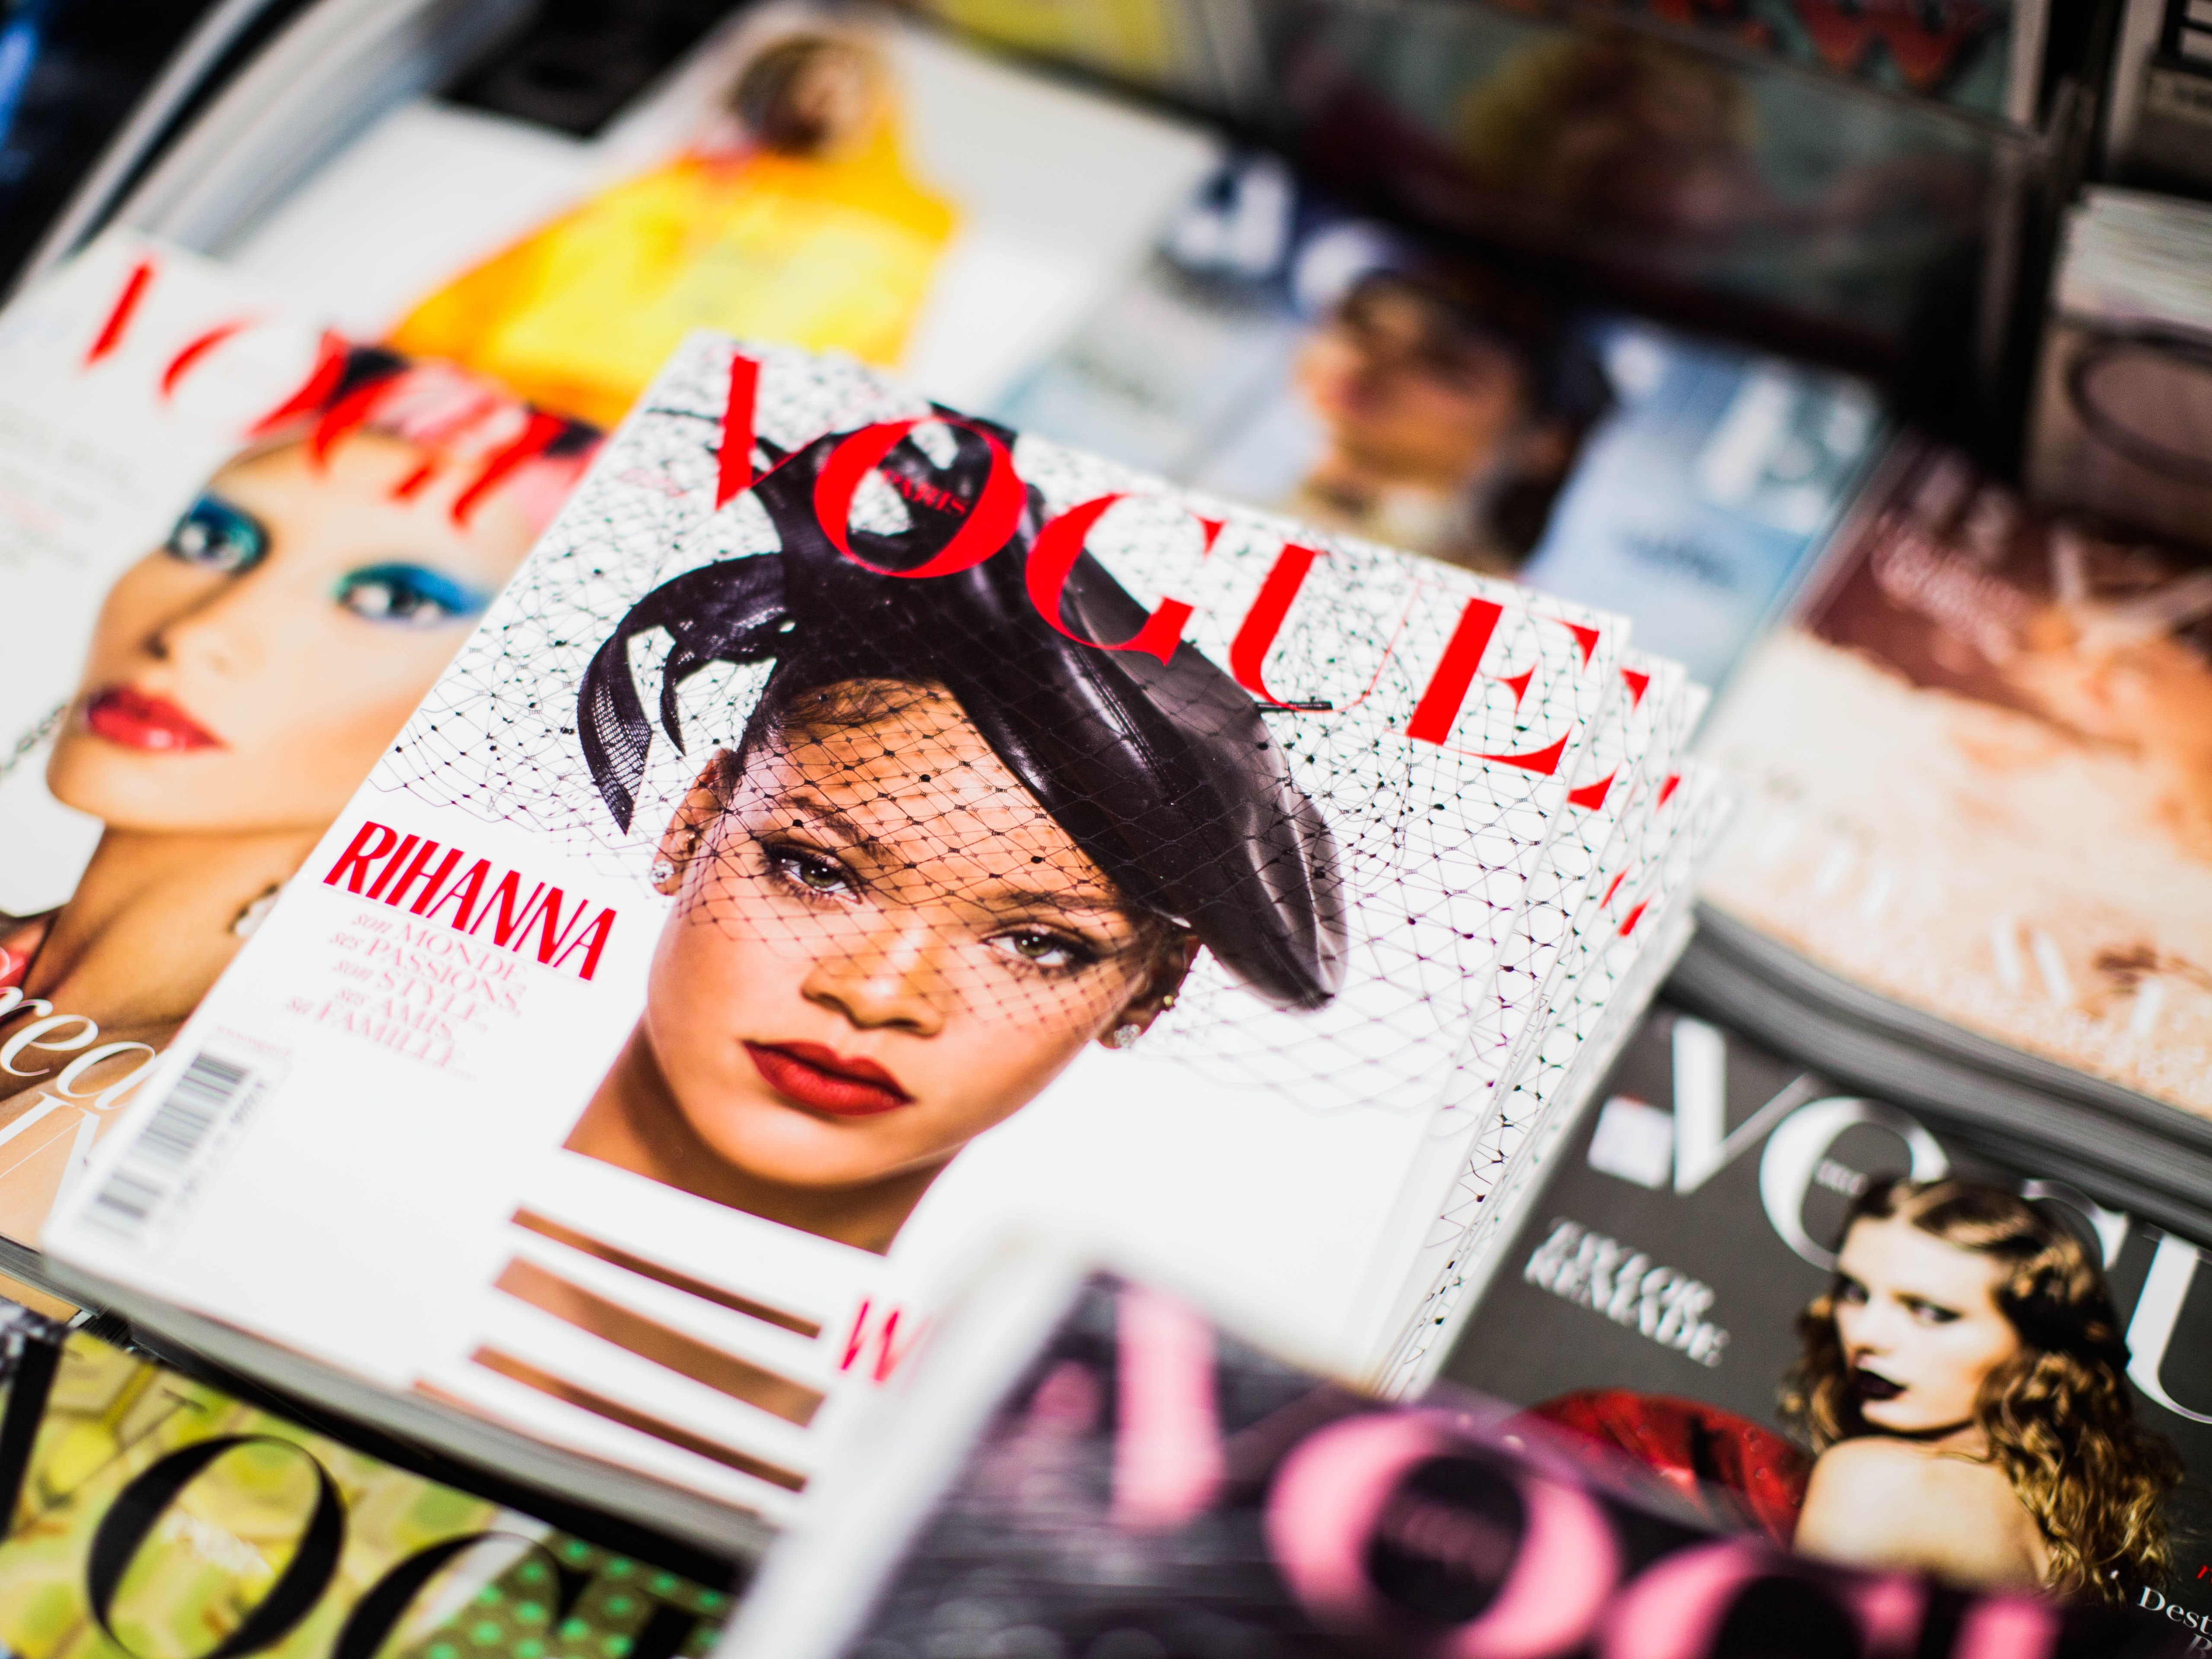 Close up of Vogue covers. The prominent cover features Rihanna. 